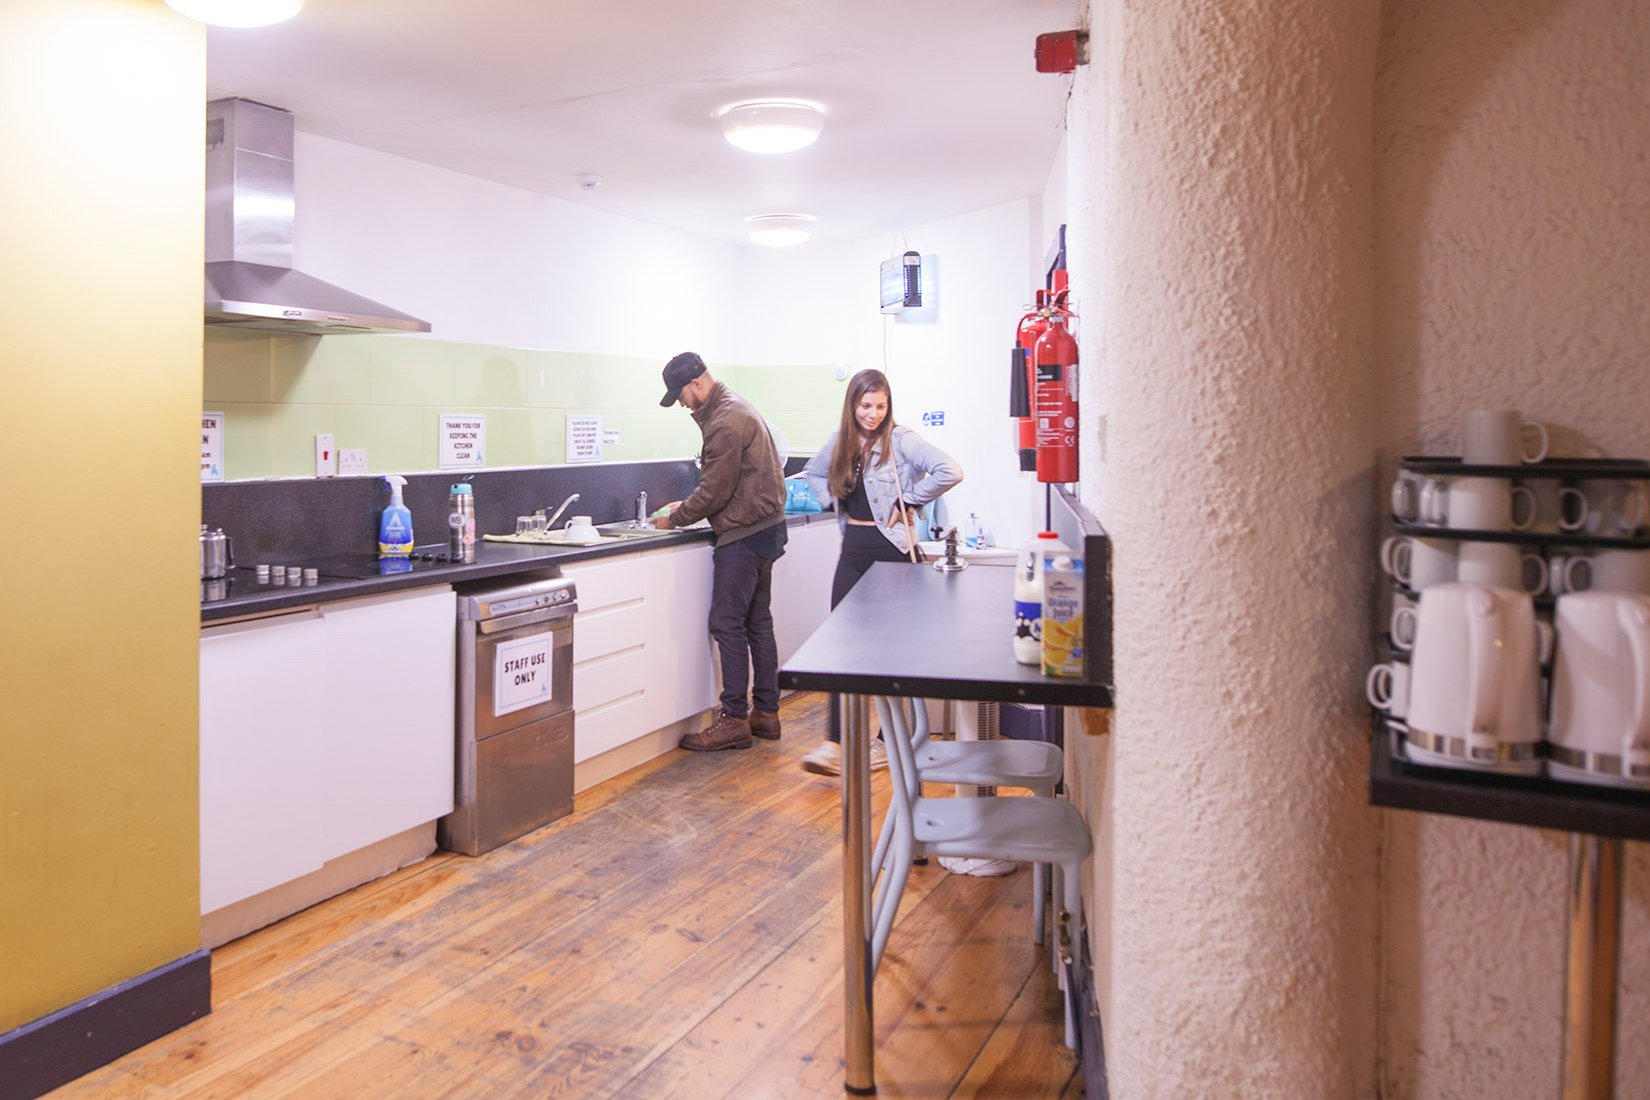 Tourists Preparing Food in the Self-Catering Kitchen in Hostel 